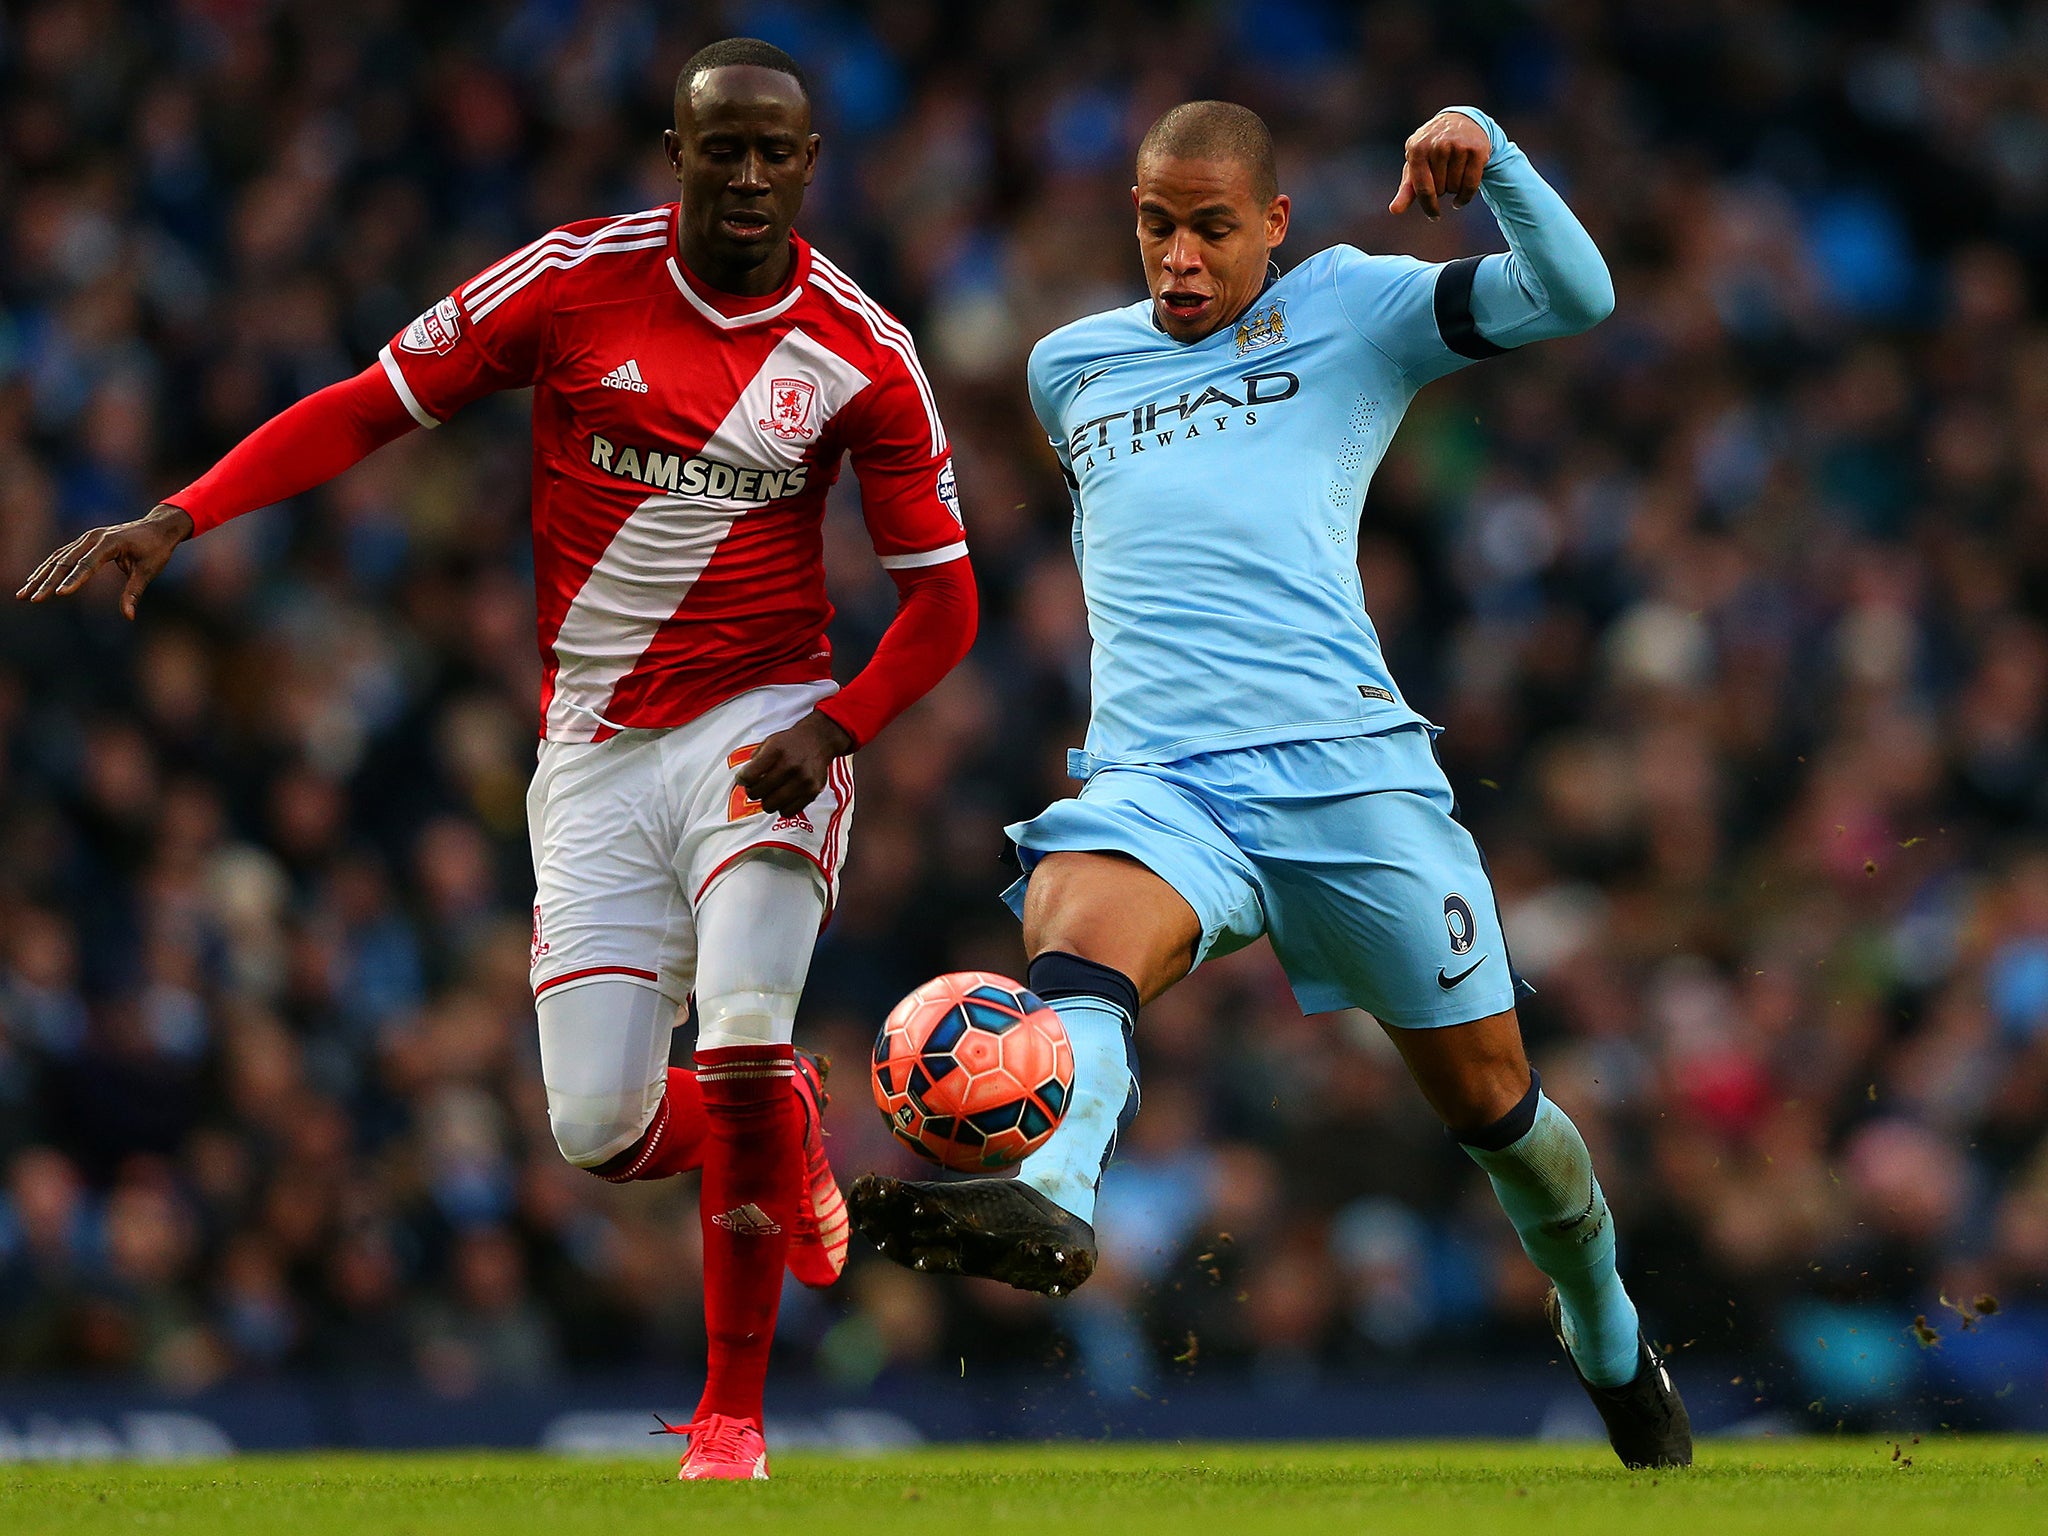 Albert Adomah of Middlesbrough chases Fernando of Manchester City as he underhits a backpass